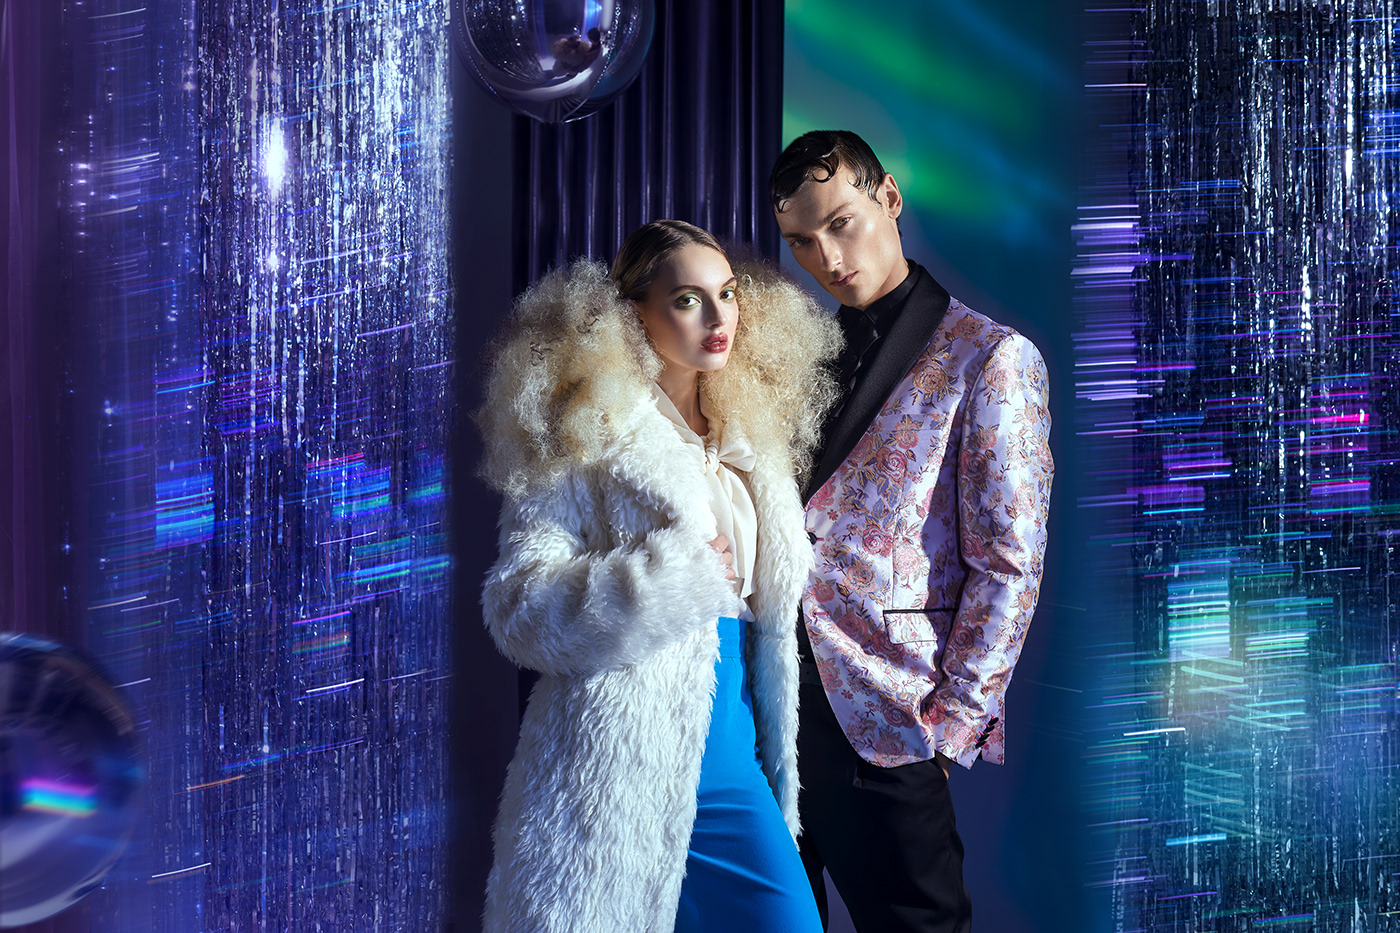 STOCKMANN NY CAMPAIGN '2021

client_ STOCKMANN RUSSIA
